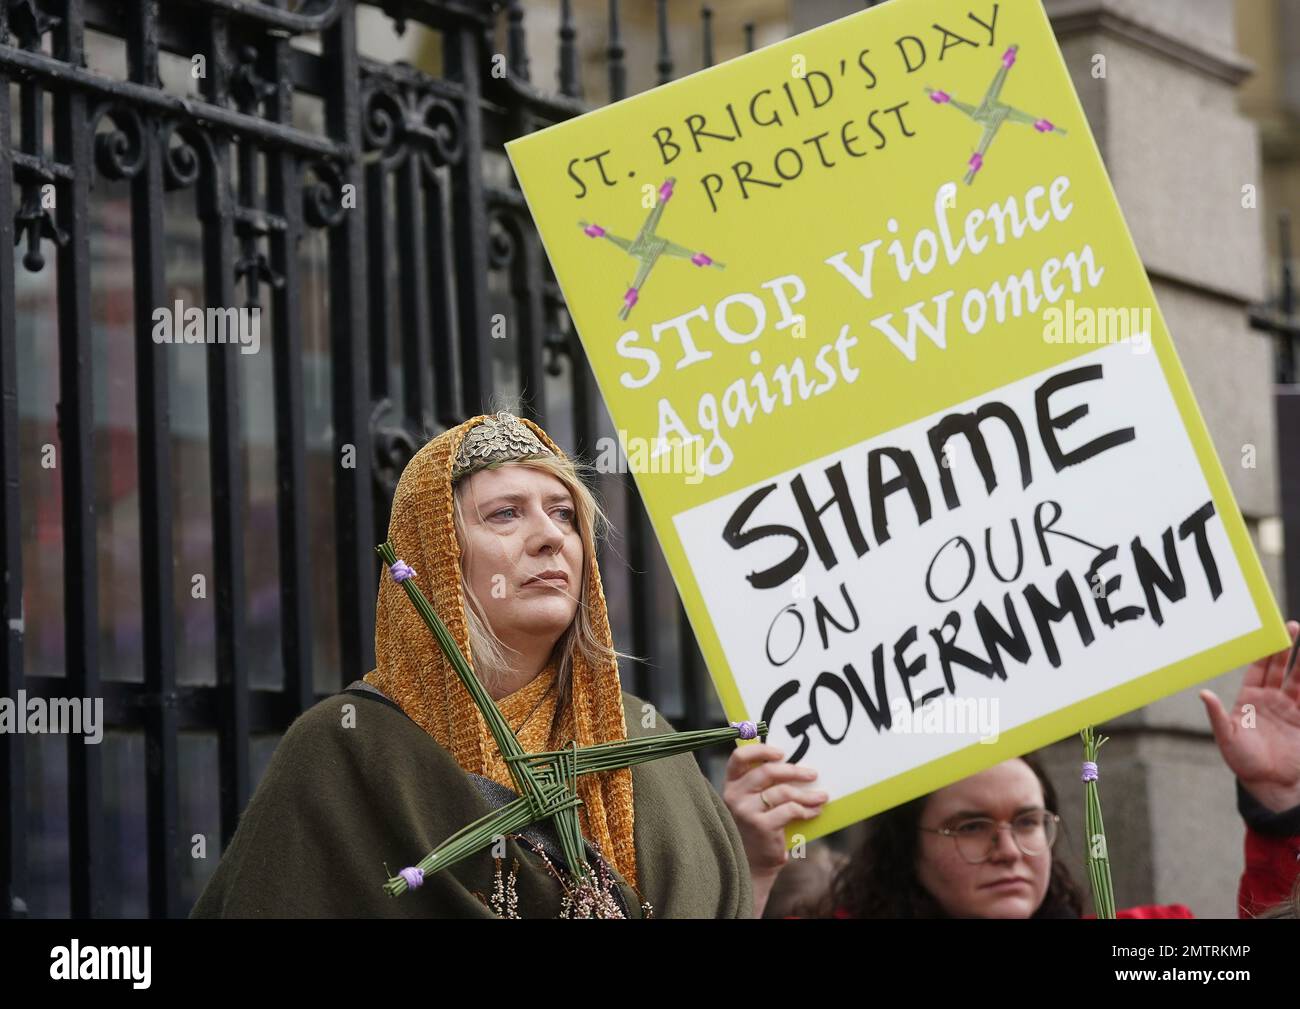 Lisamarie Johnson (left), holding a traditional St. Brigid's Cross made from rushes, attends a St Brigid's Day rally outside Leinster House, Dublin, calling on the Government to take action in addressing violence against women in Ireland. The rally was held to coincide with St Brigid’s Day, with speakers asking that women be protected in the spirit of the Celtic goddess and Christian saint Brigid, who is associated with healing. Picture date: Wednesday February 1, 2023. Stock Photo